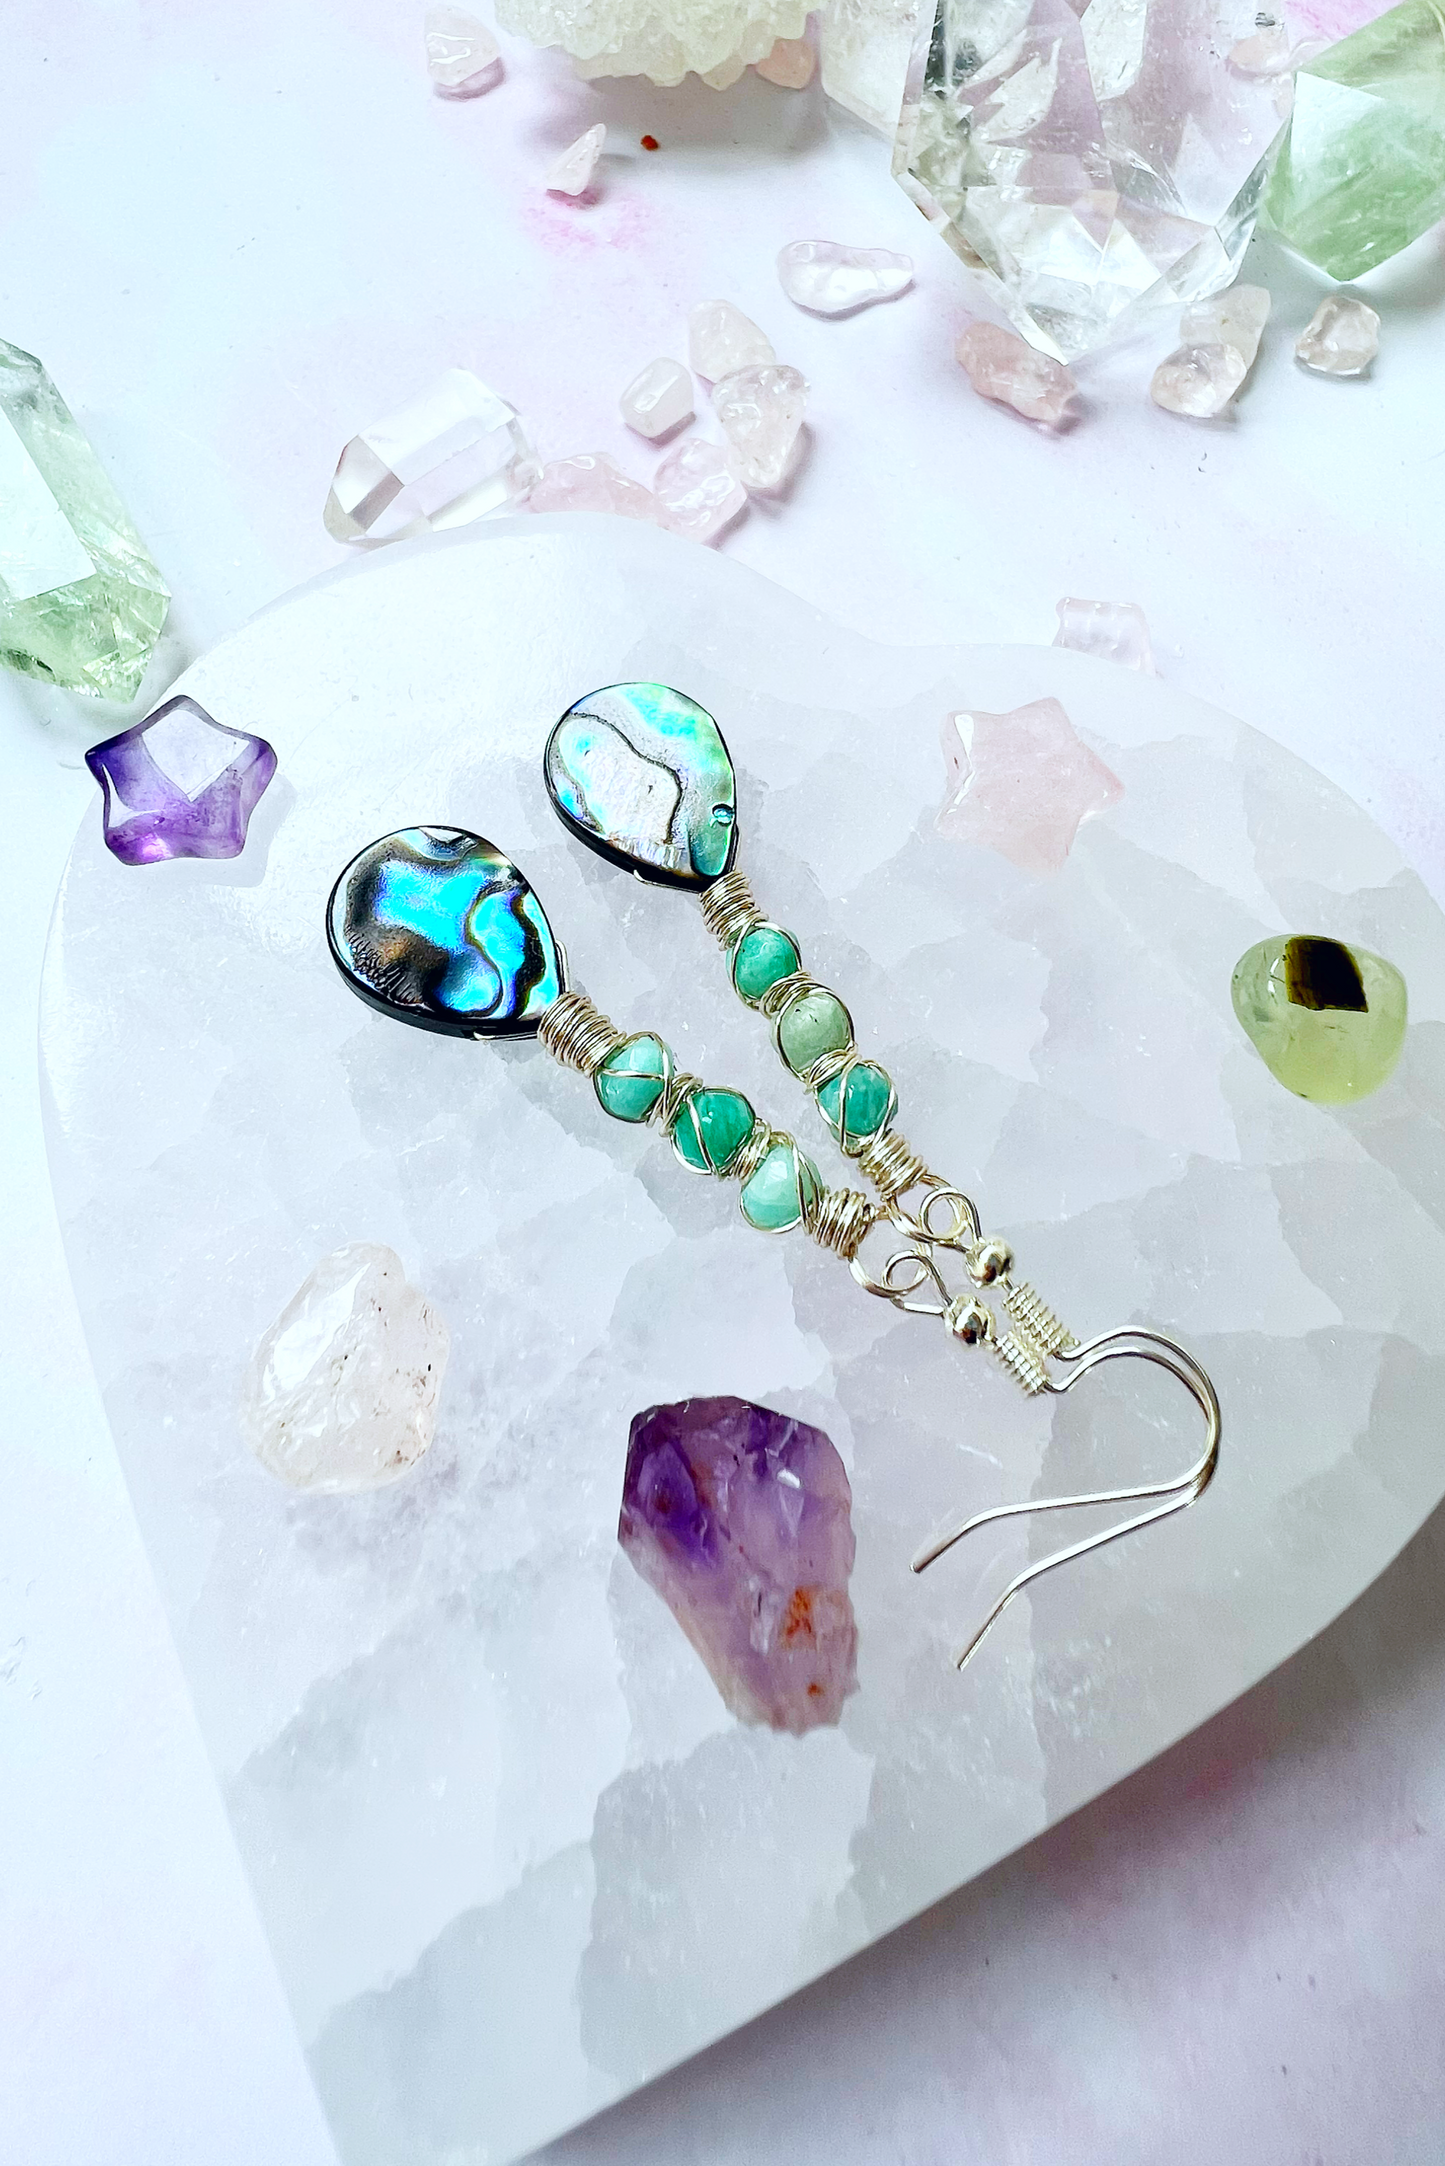 Abalone Summer Collection - amazonite earrings 2